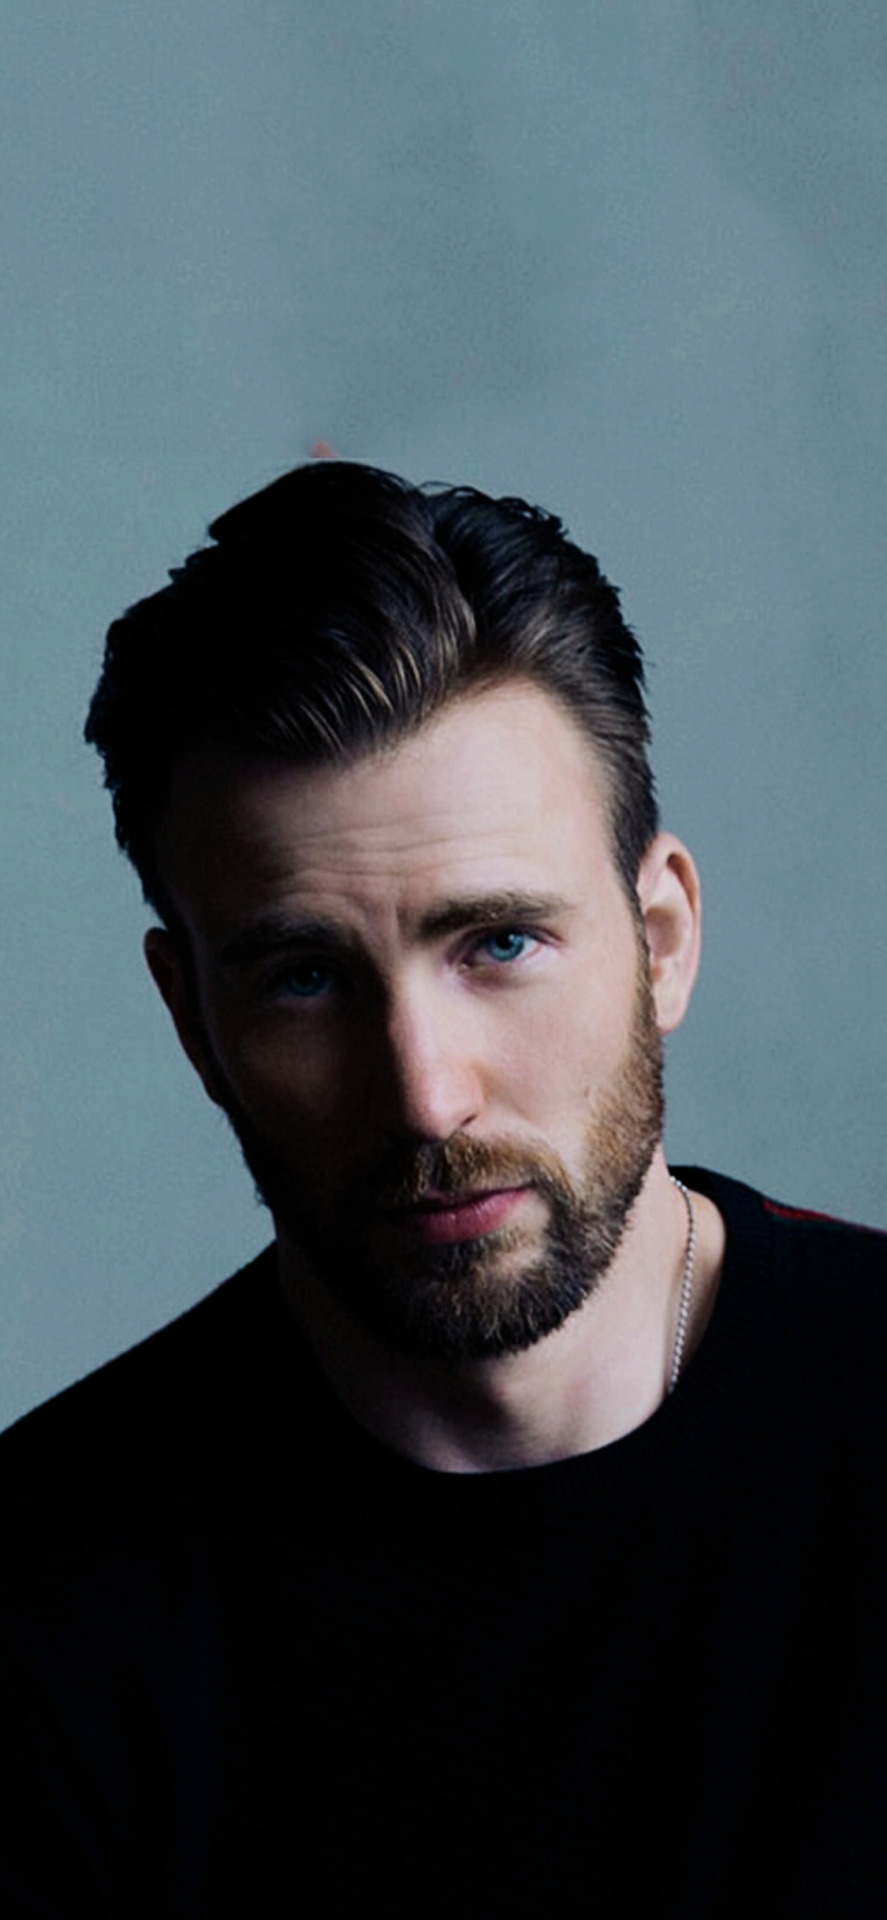 Chris Evans talks about new movie, 'Ghosted' - Good Morning America